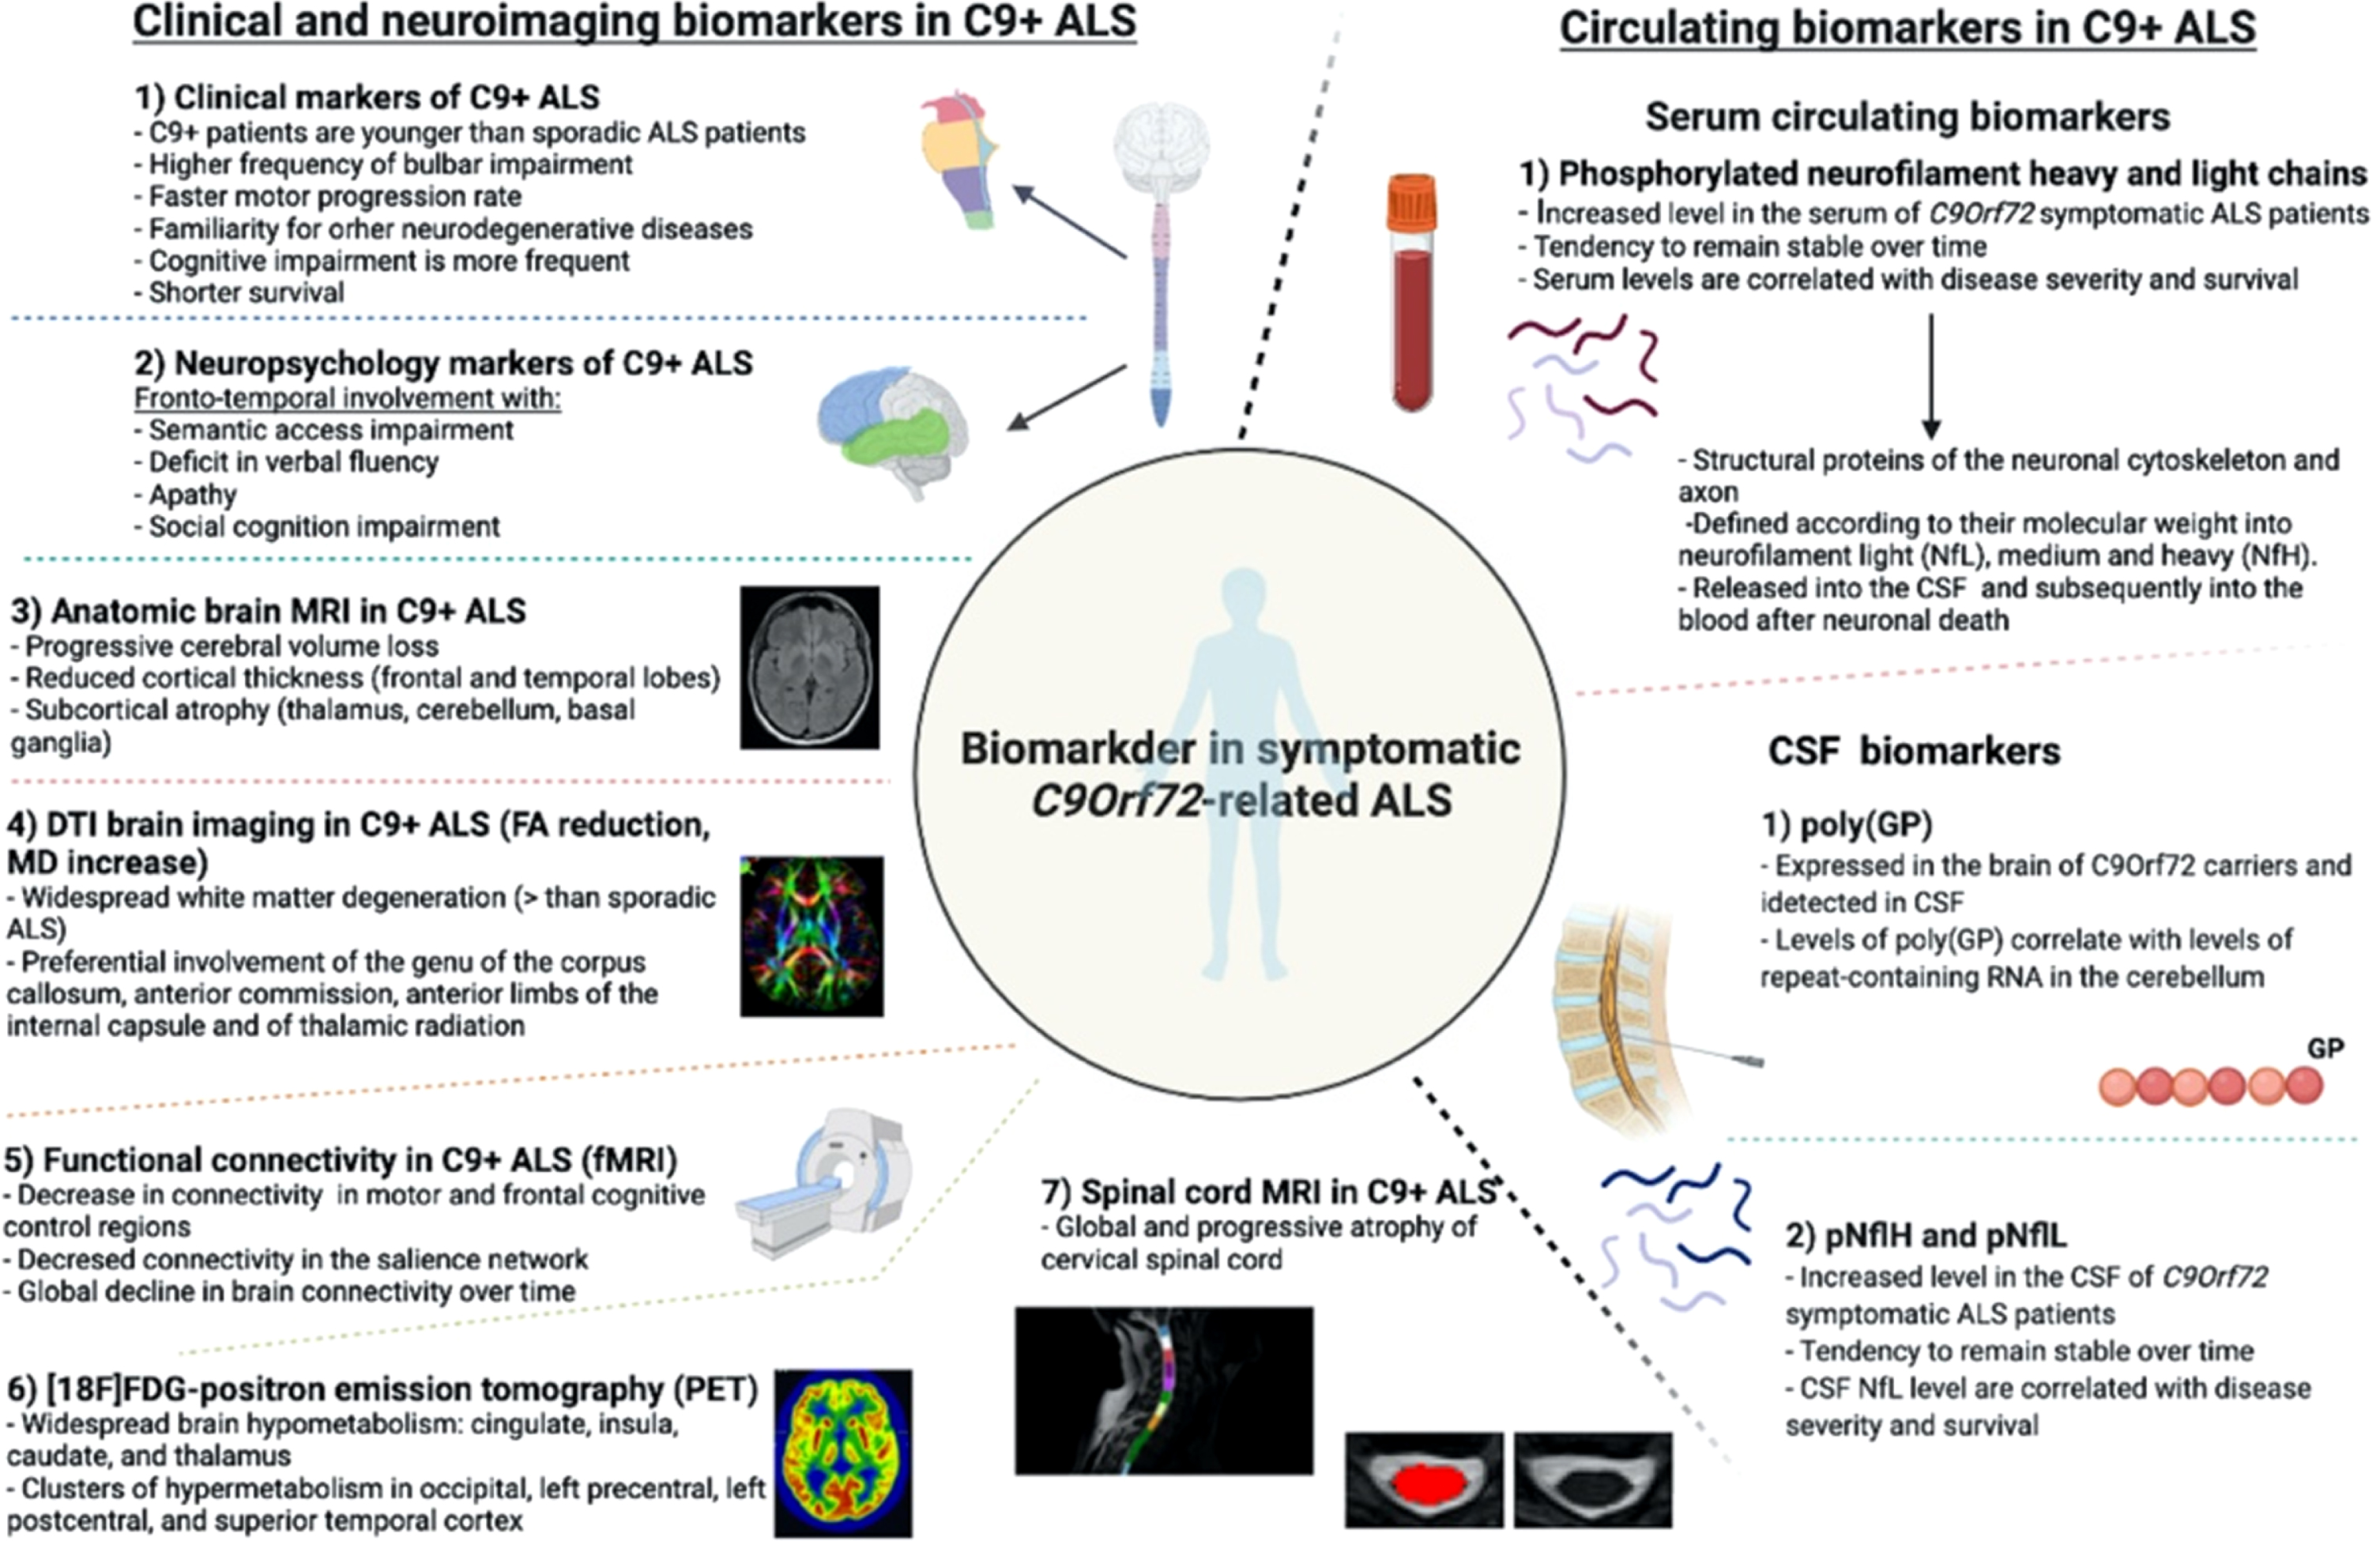 Biomarkers in C9orf72-related ALS.